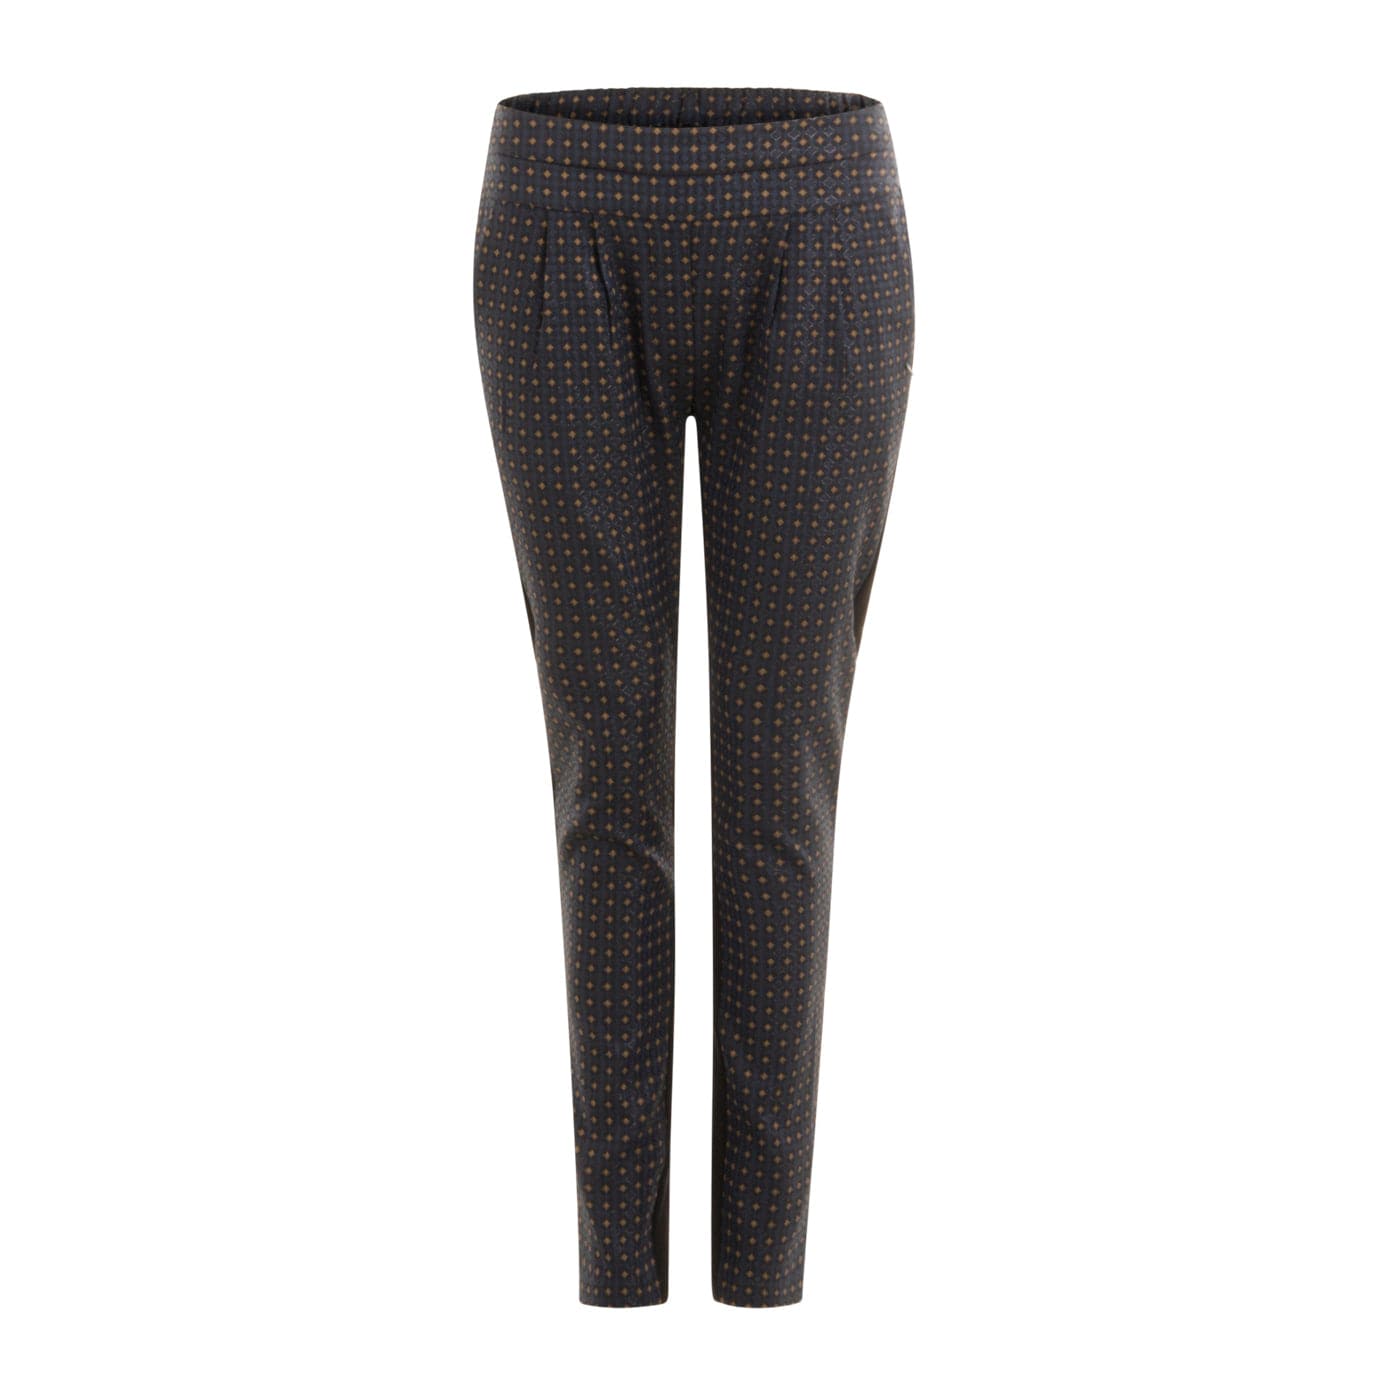 Coster Copenhagen dark blue trousers in jacquard w. lurex - Your Style Your Story